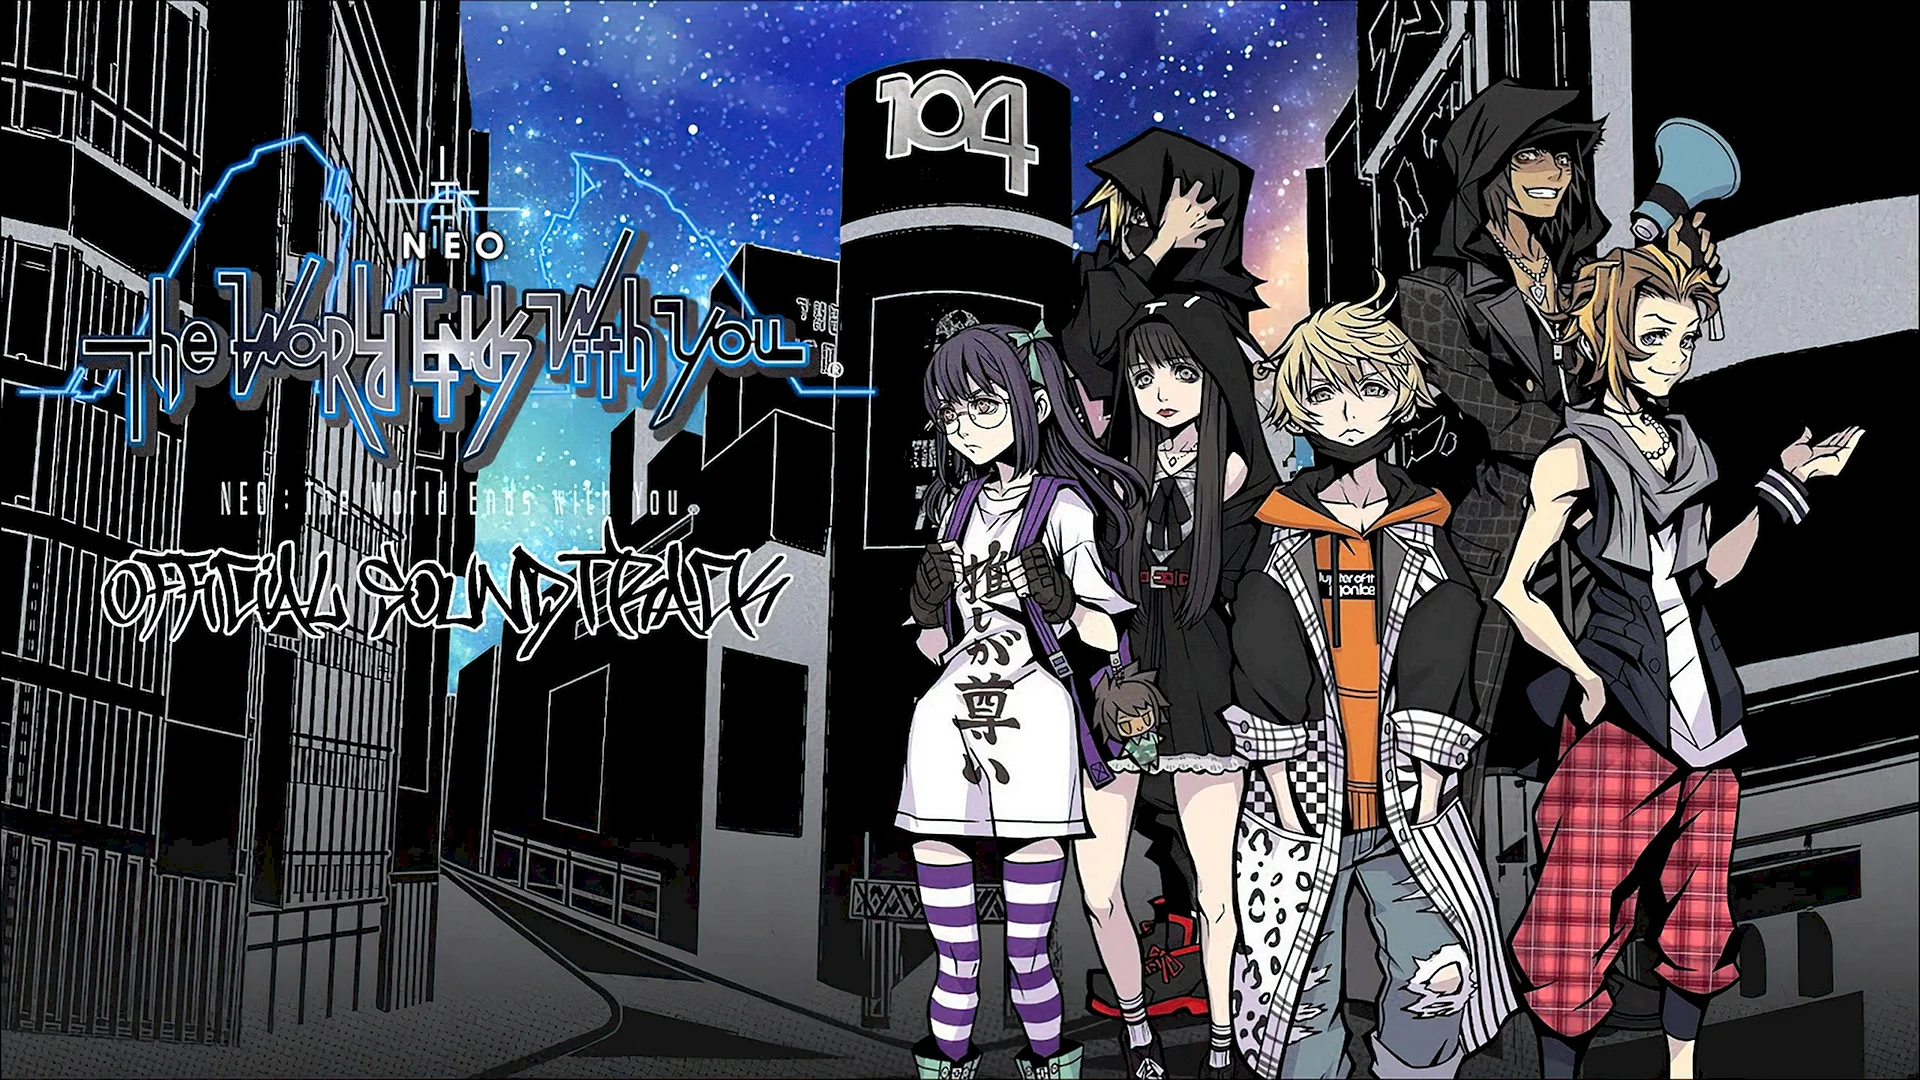 Neo The World Ends With You Wallpaper